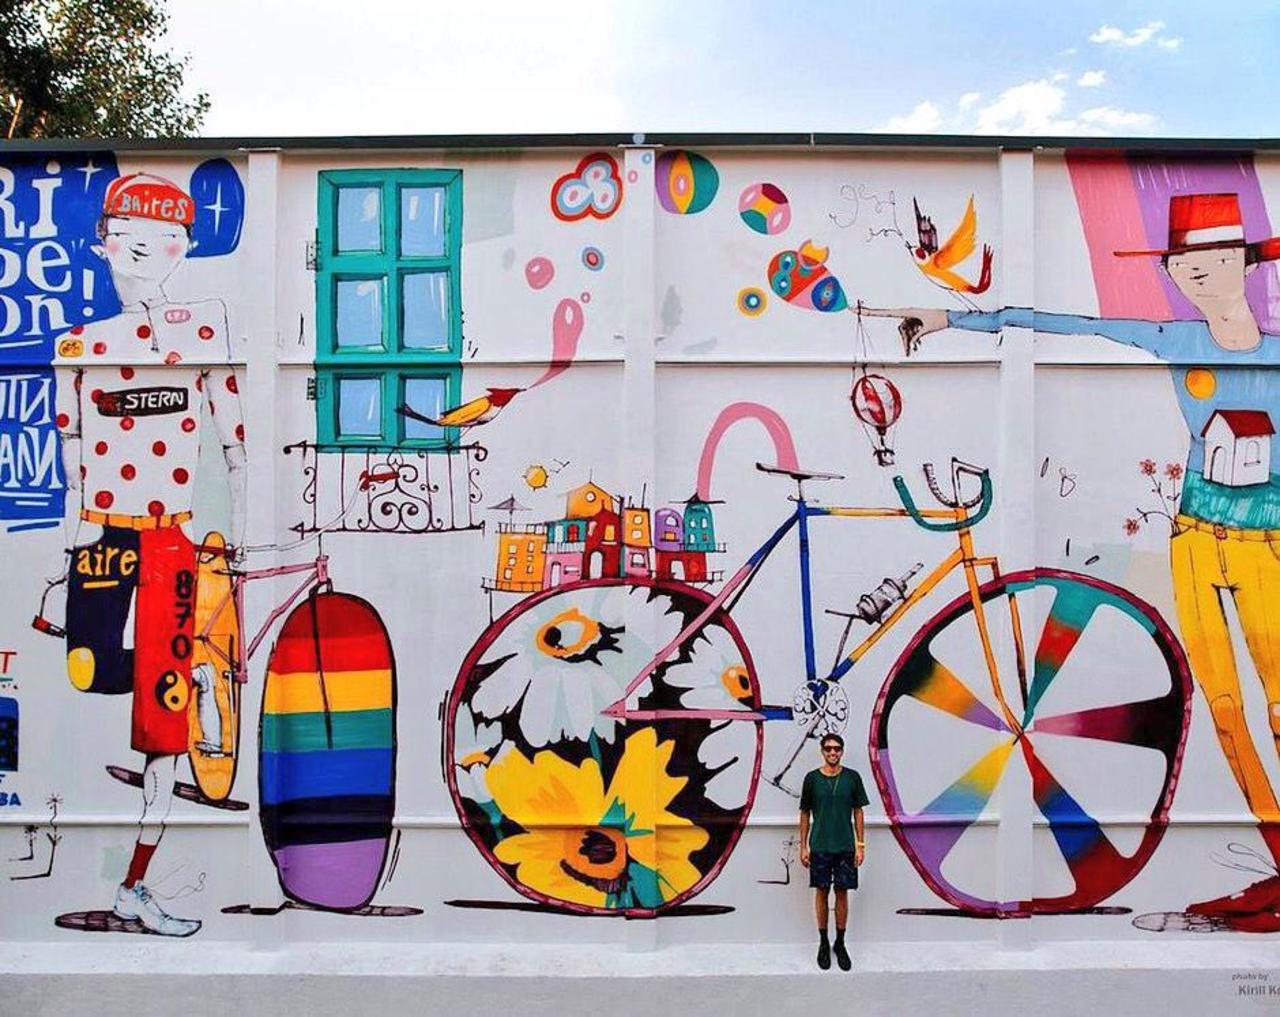 Playful and so colorful “@Pitchuskita: #streetart #art #graffiti #mural http://t.co/mCeogIxlM3”